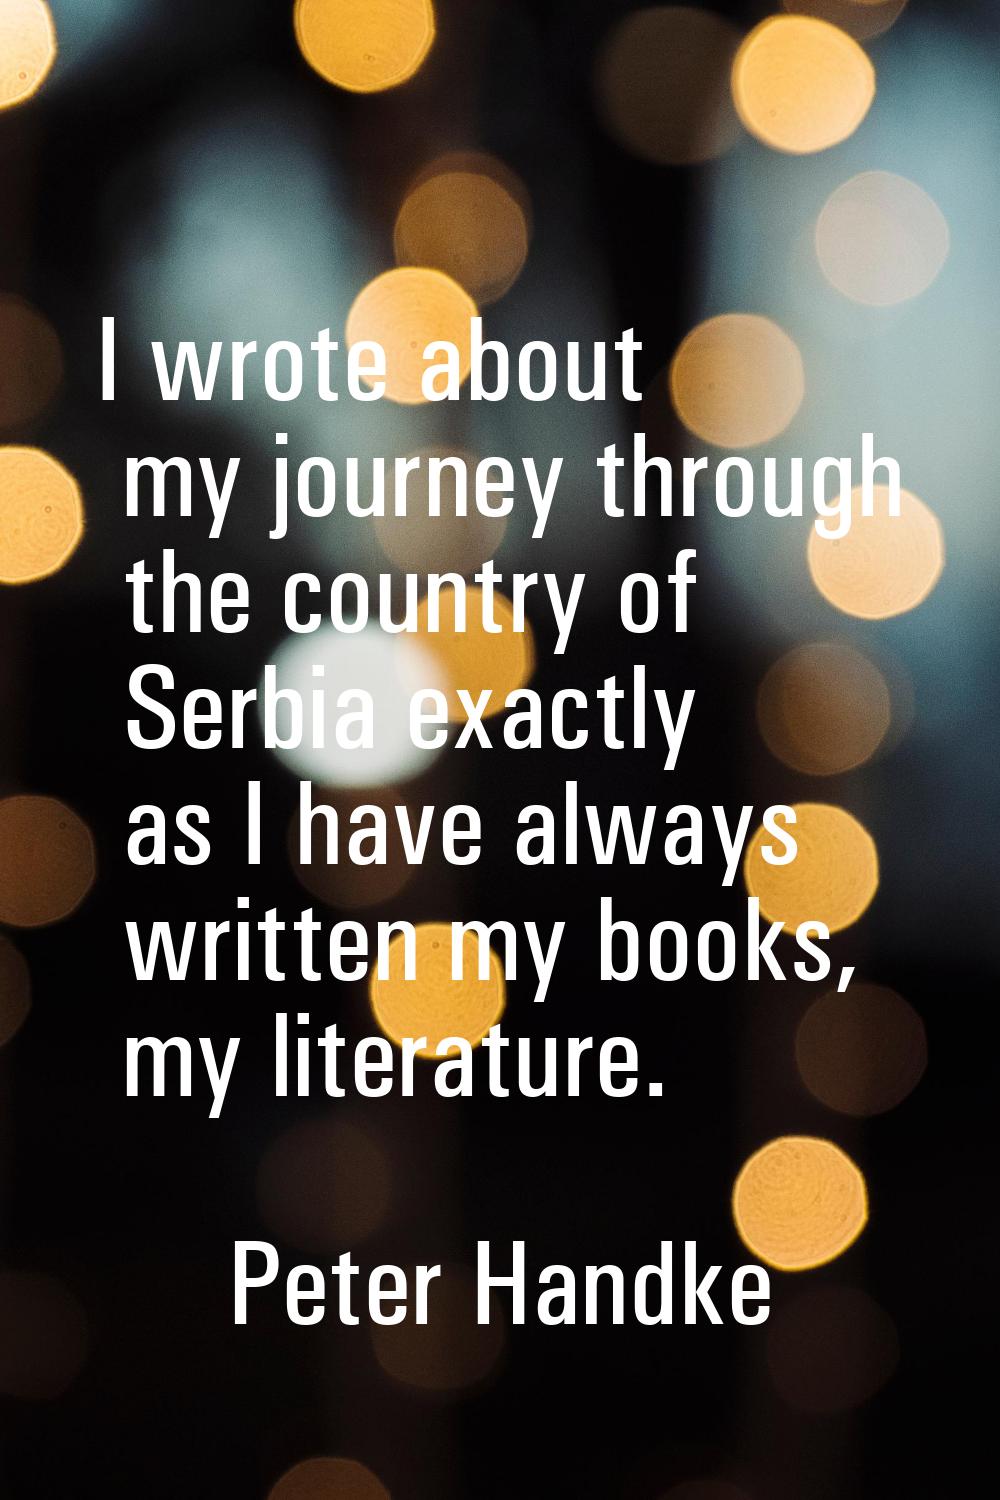 I wrote about my journey through the country of Serbia exactly as I have always written my books, m